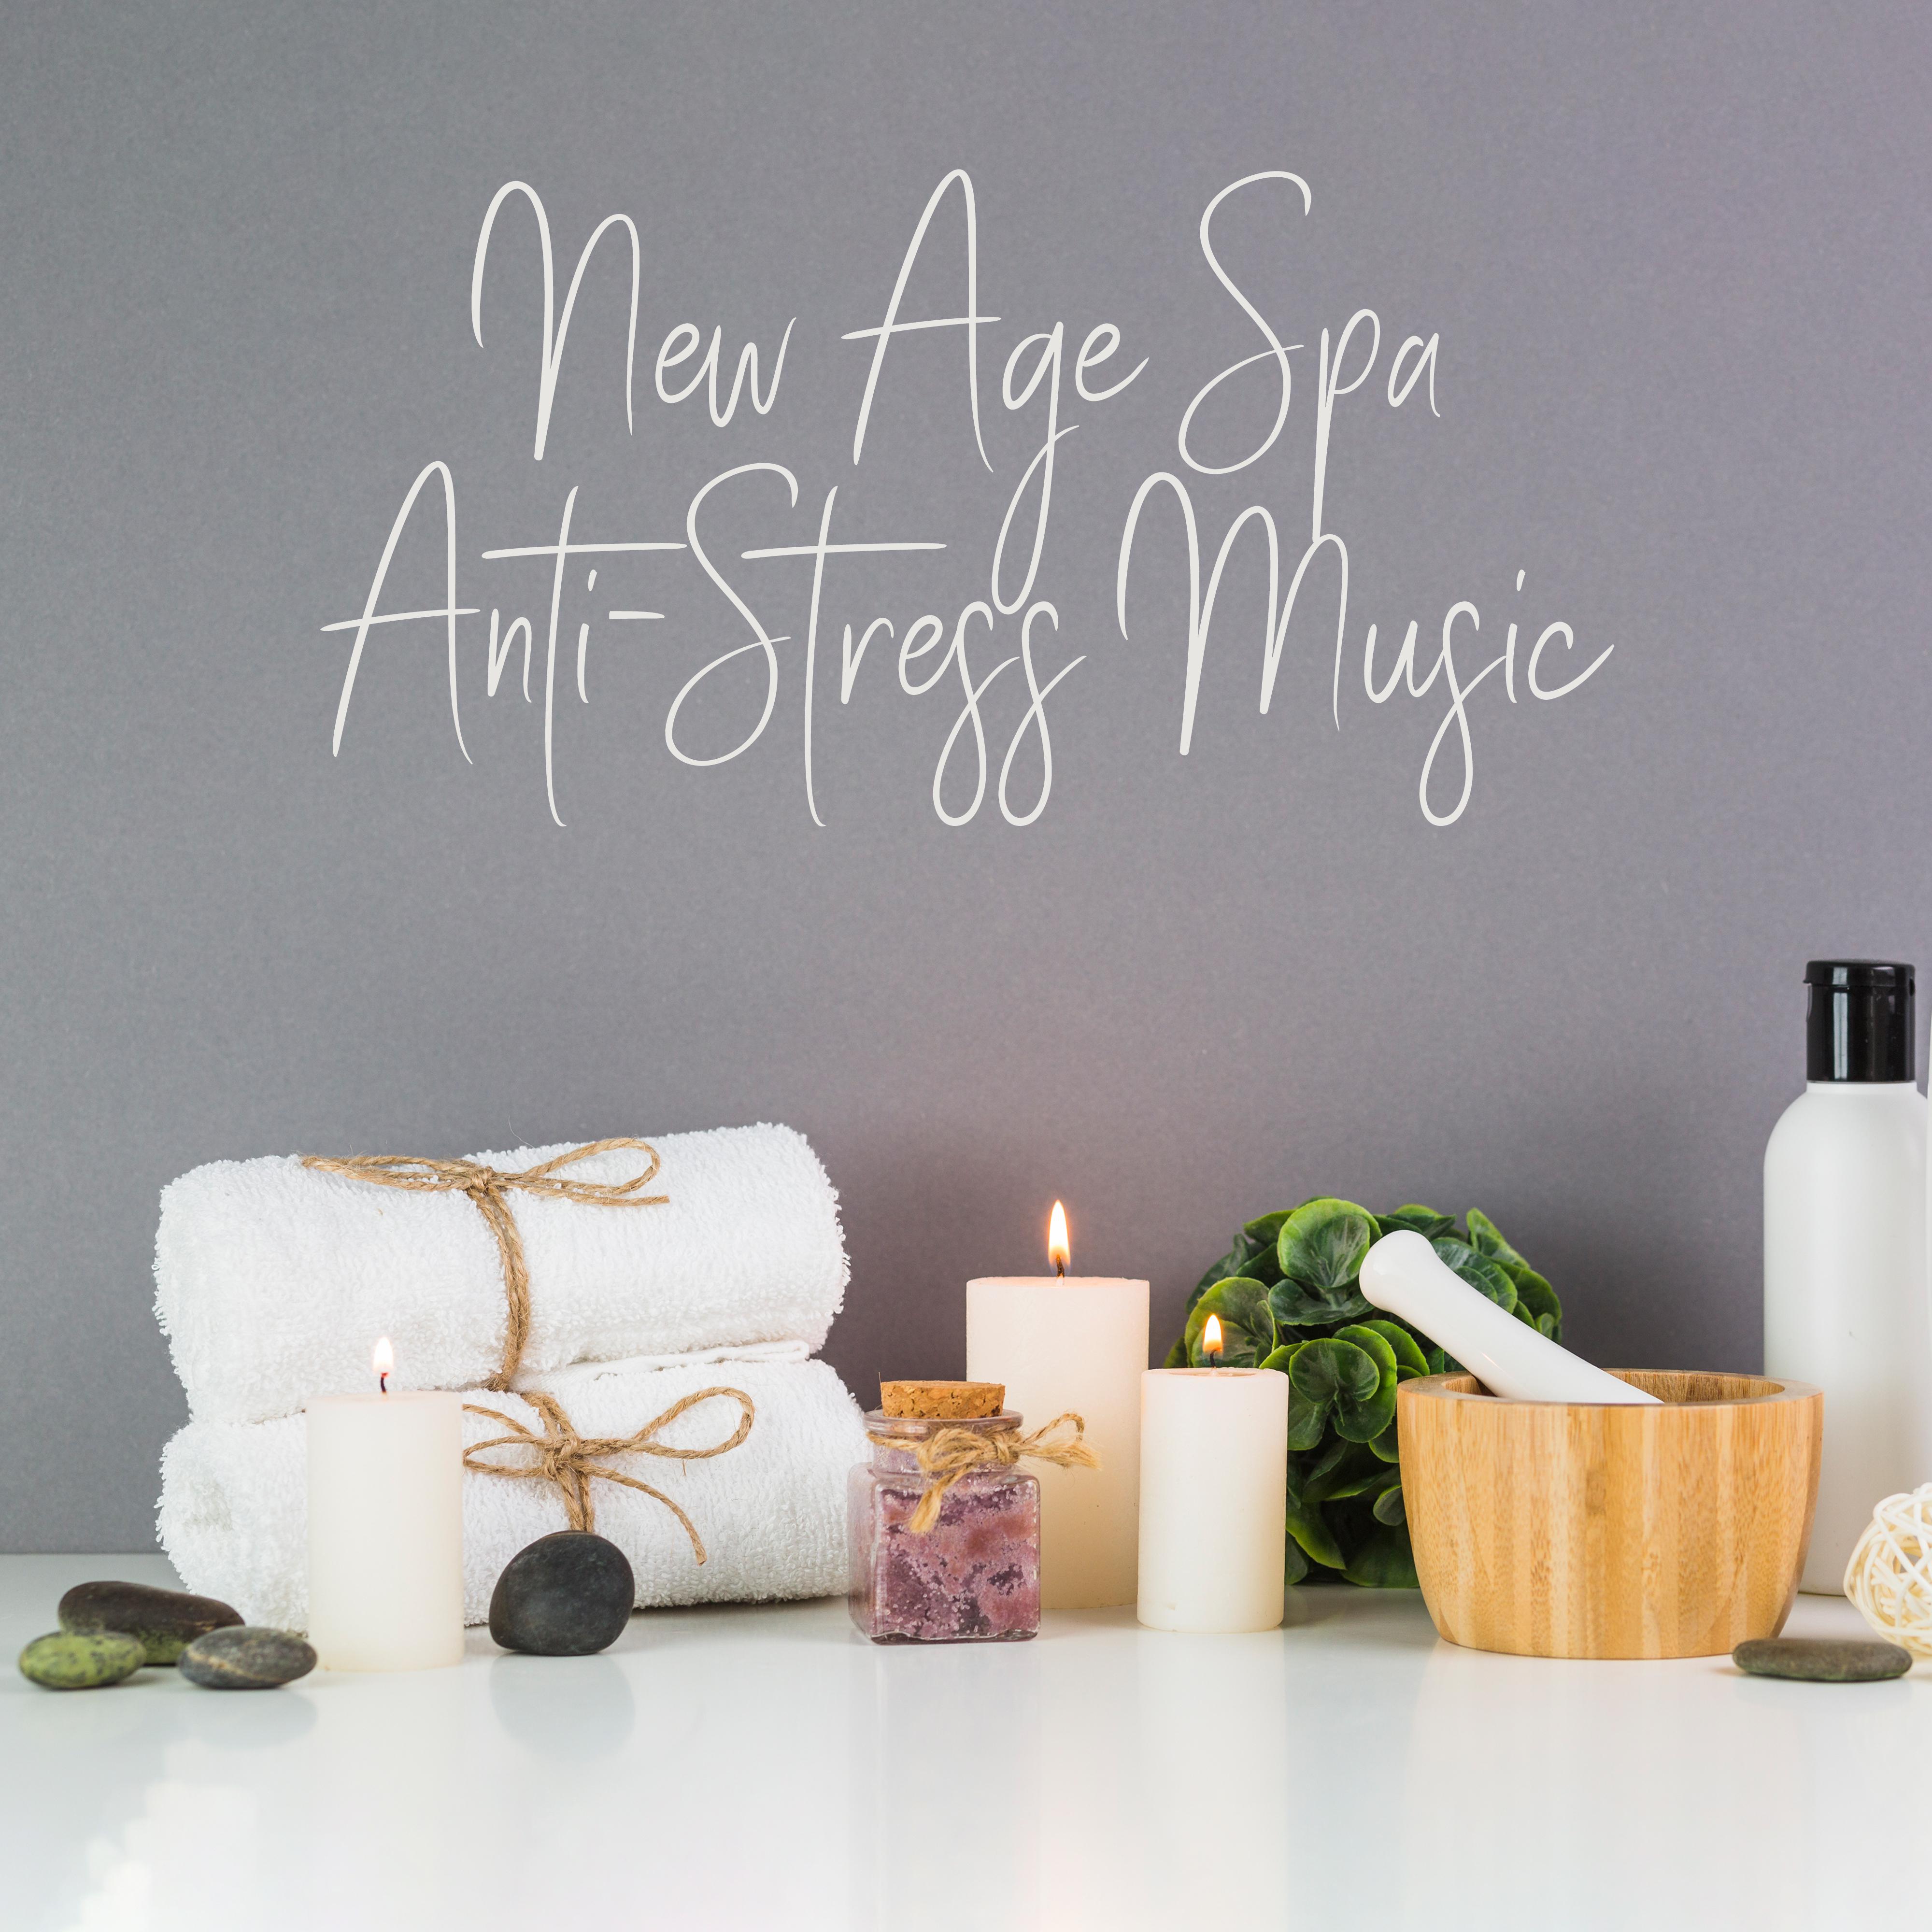 New Age Spa AntiStress Music  Perfect Music for Spa  Wellness to Full Body  Mind Relax